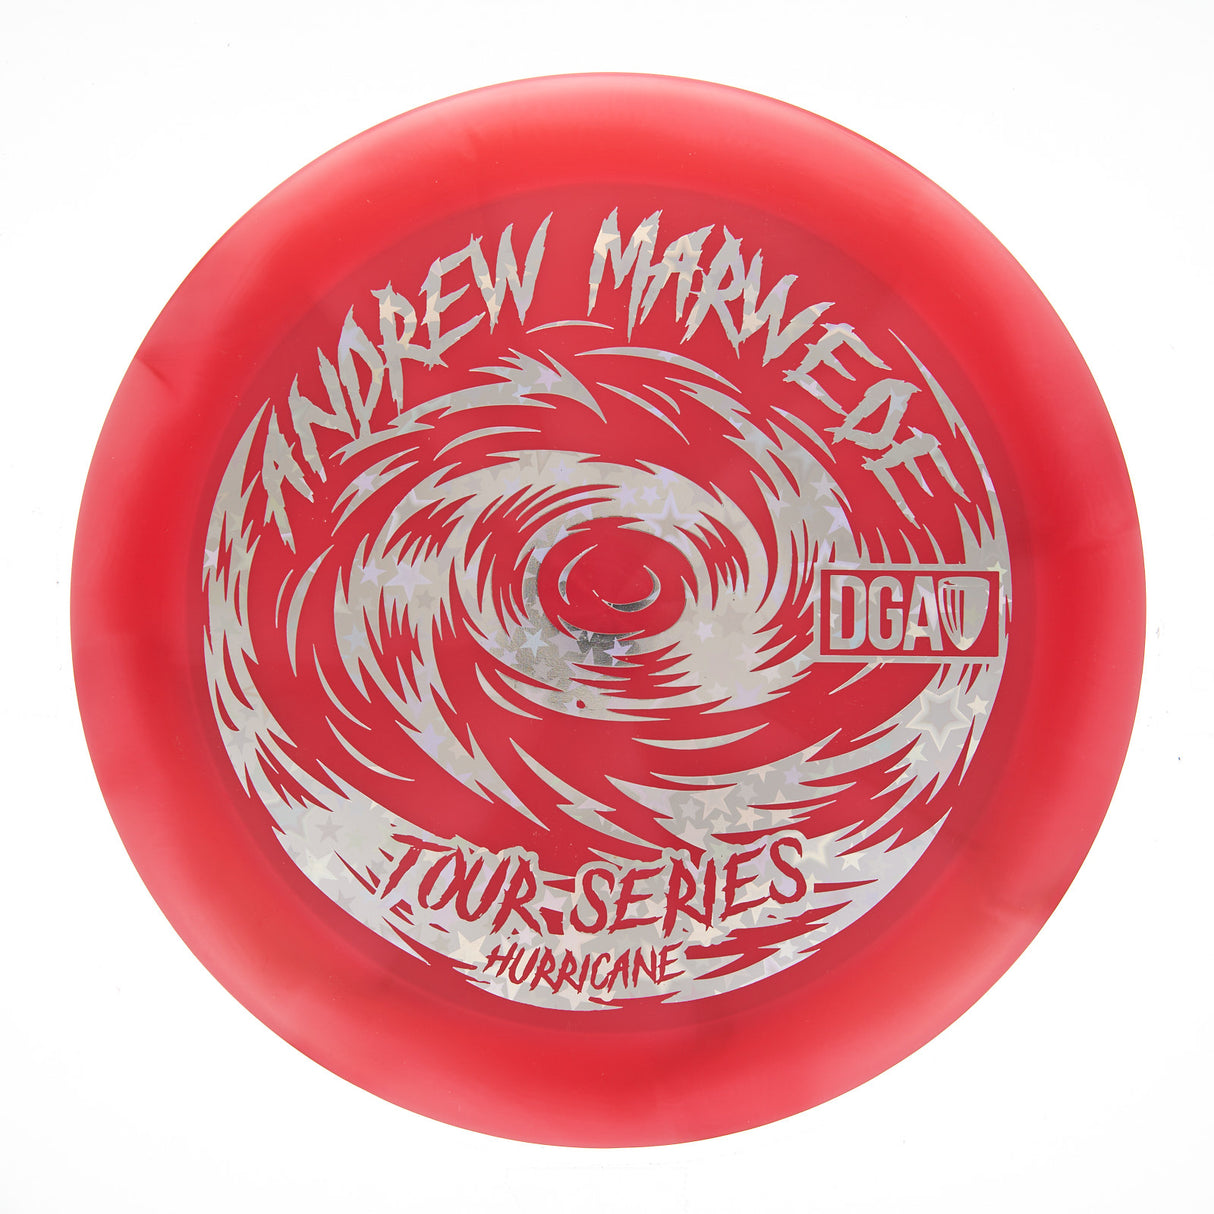 DGA Hurricane - 2023 Andrew Marwede Tour Series Swirl 178g | Style 0002